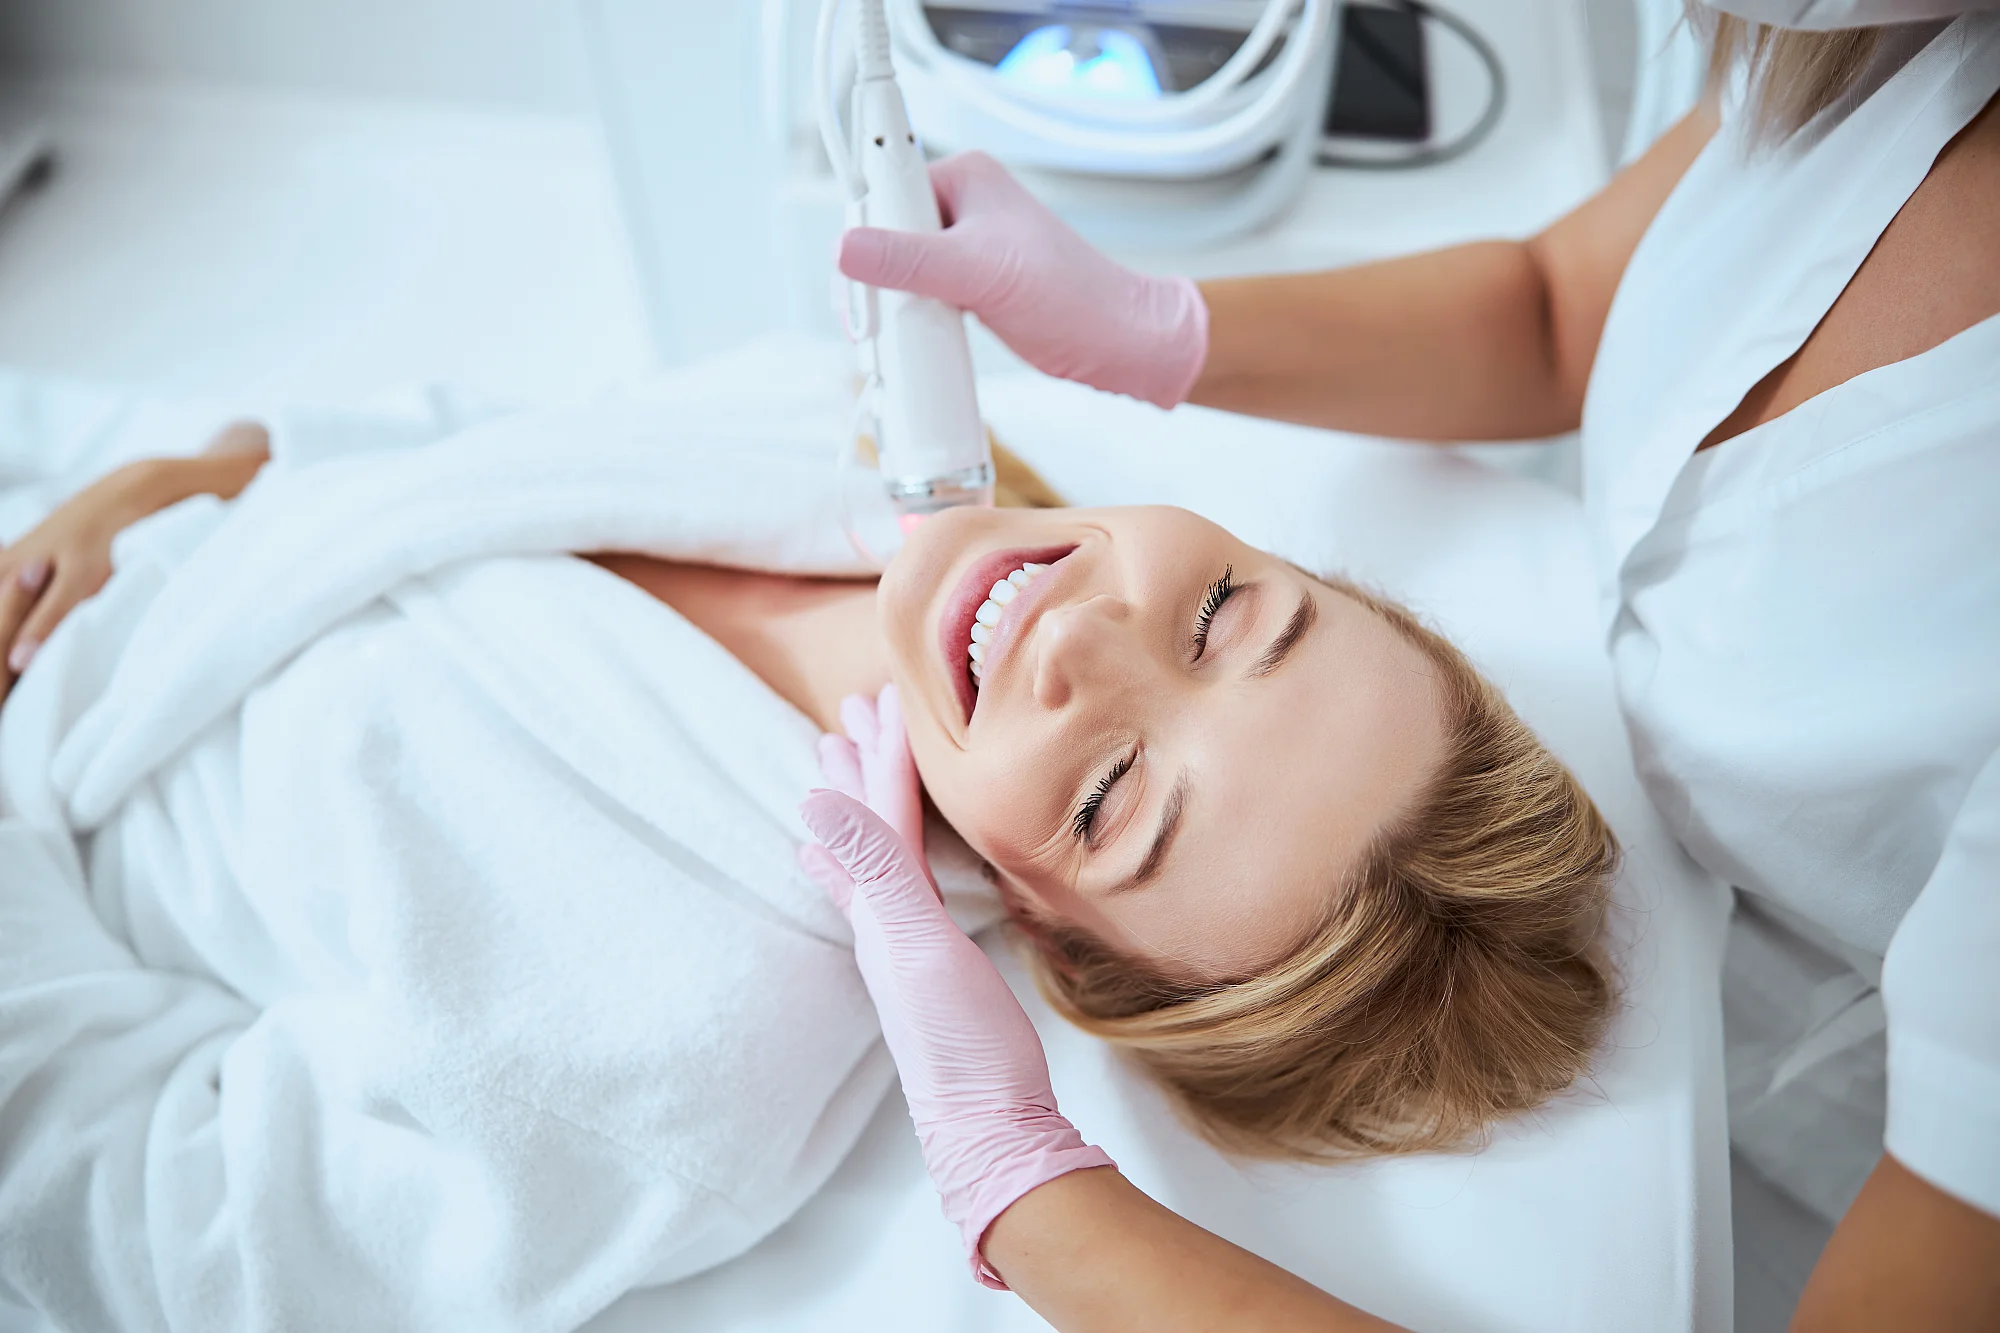 Microneedling in Colleyville, TX | Make You Well Family Practice & Aesthetics